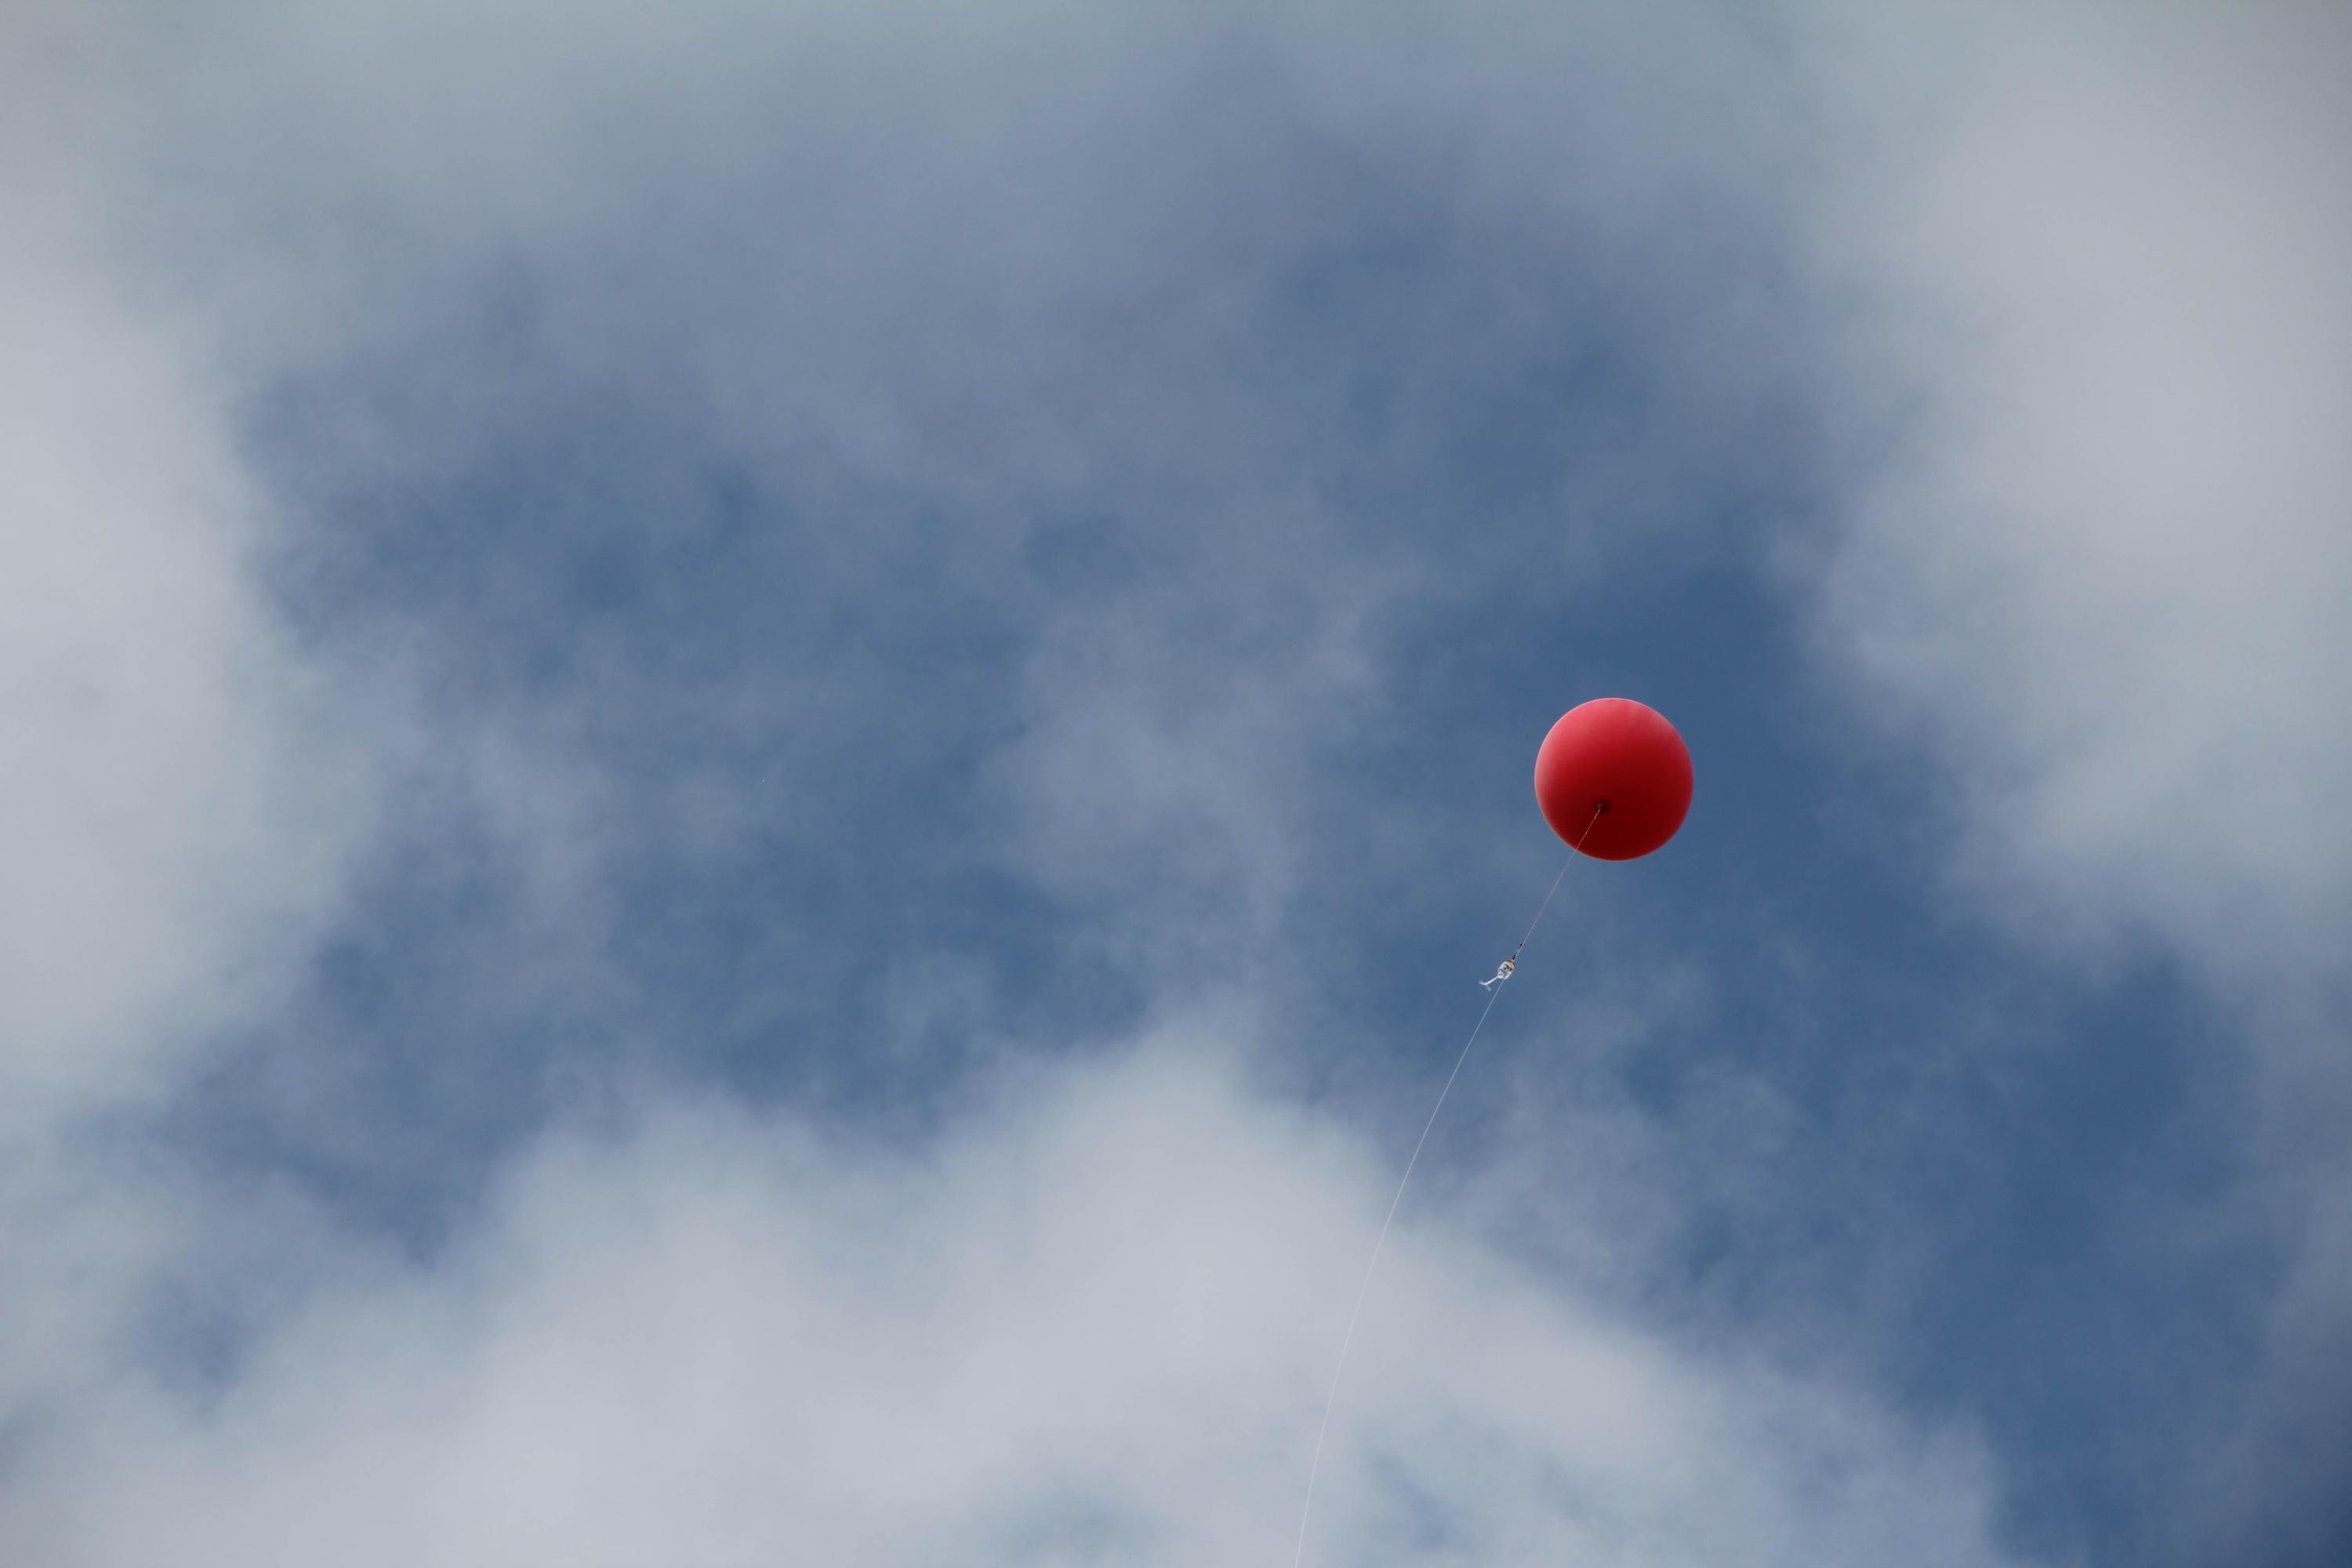 The balloon high in the sky.